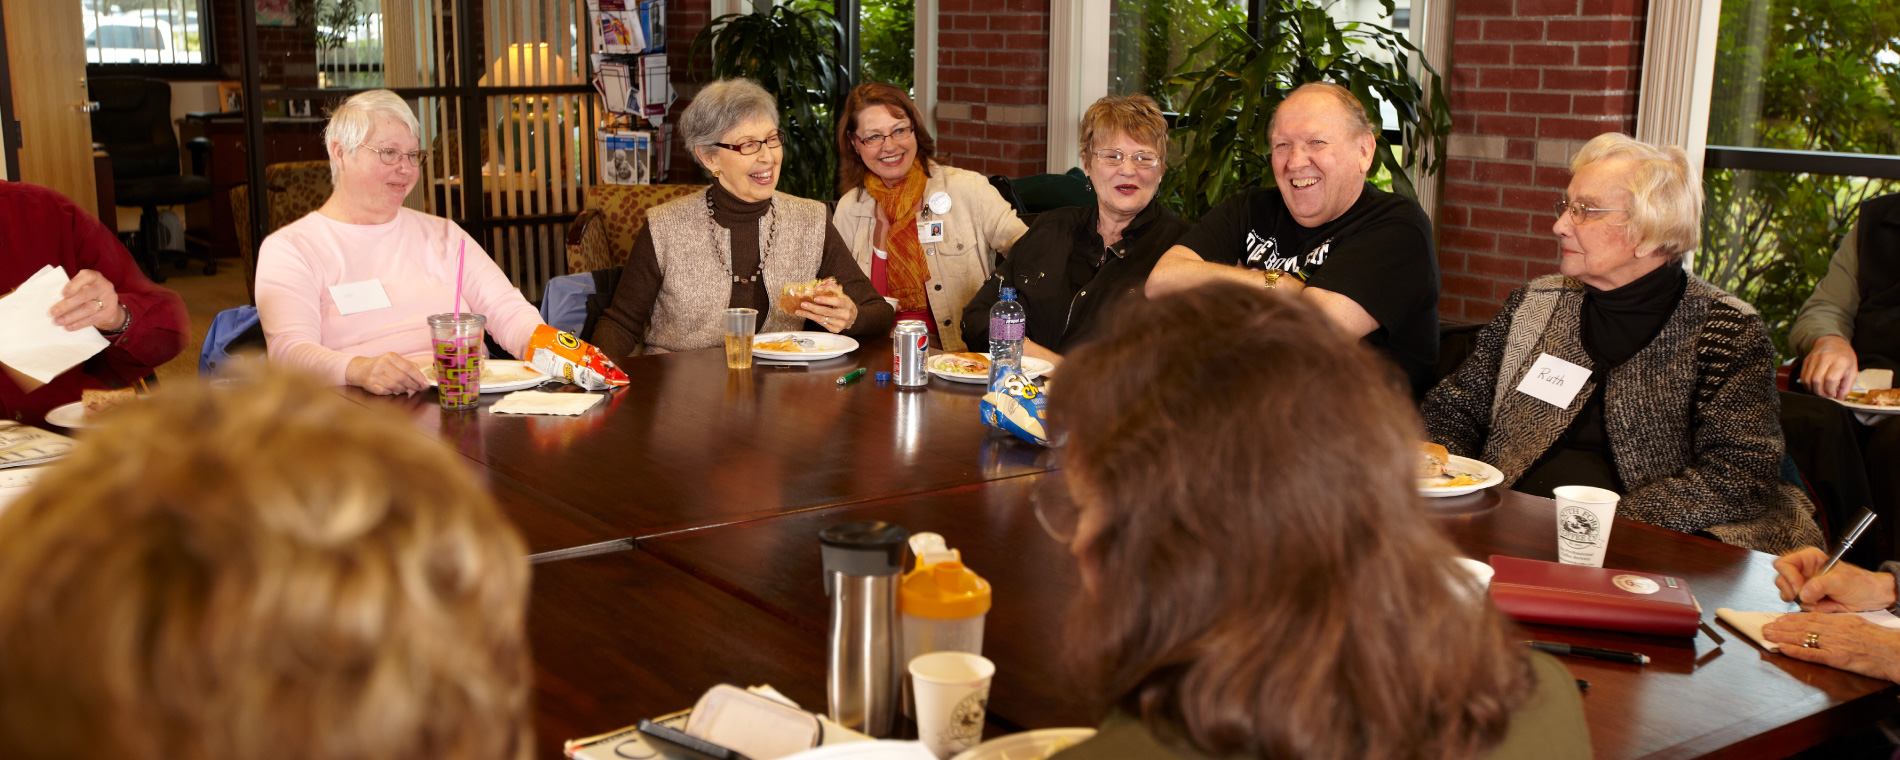 Support groups offer meaningful connections and essential information